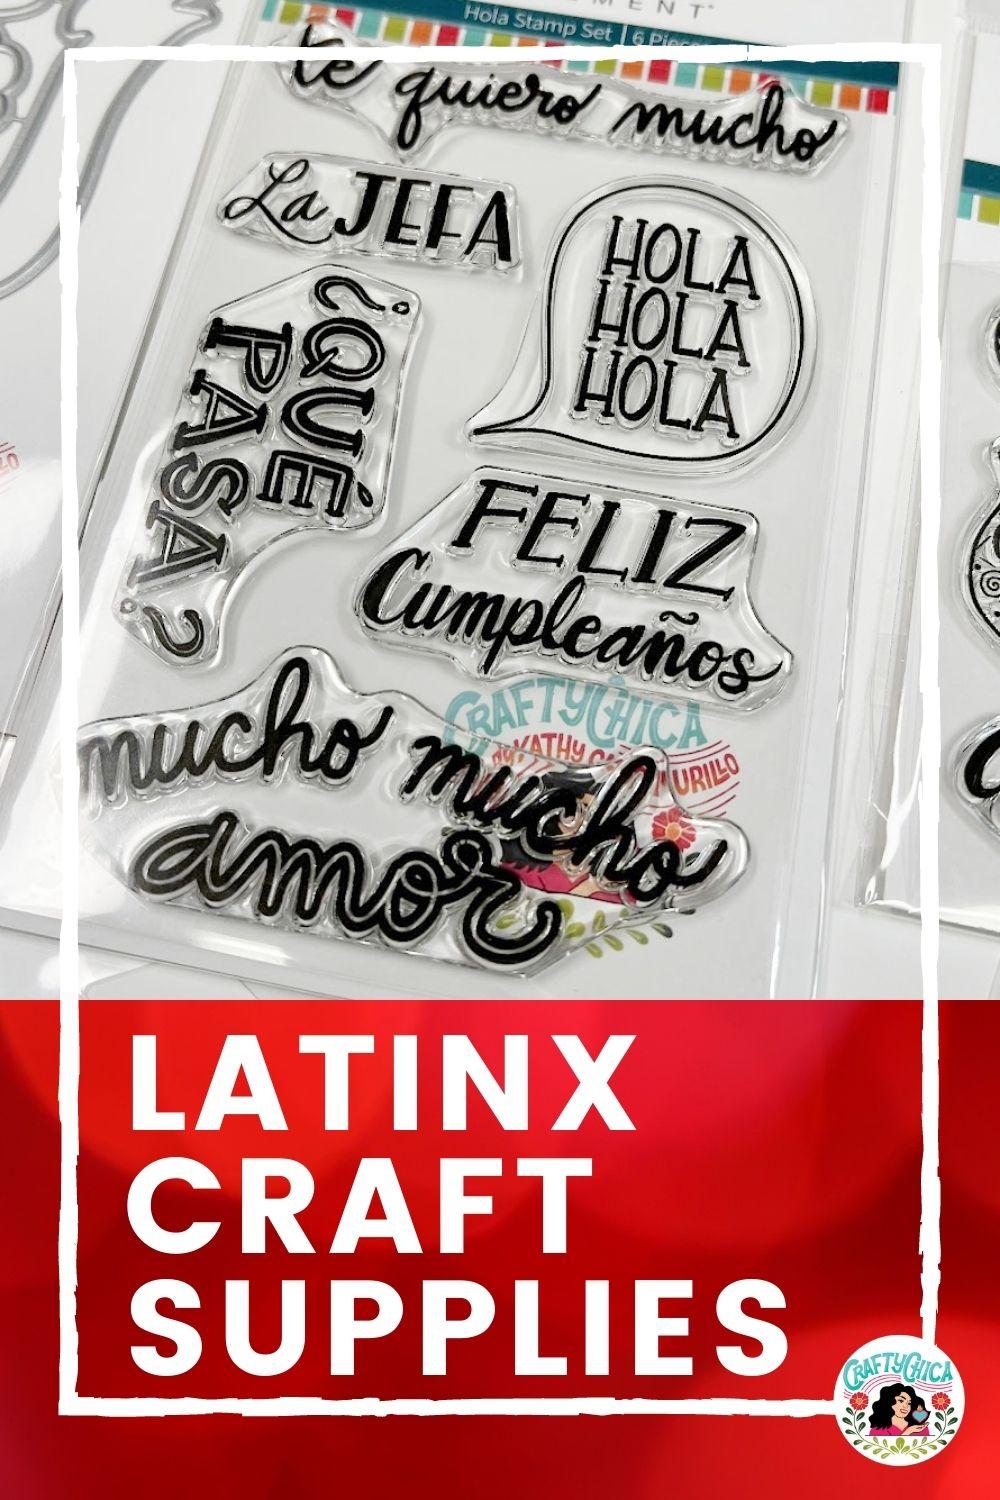 latinx craft supplies - Crafty Chica paper crafting products